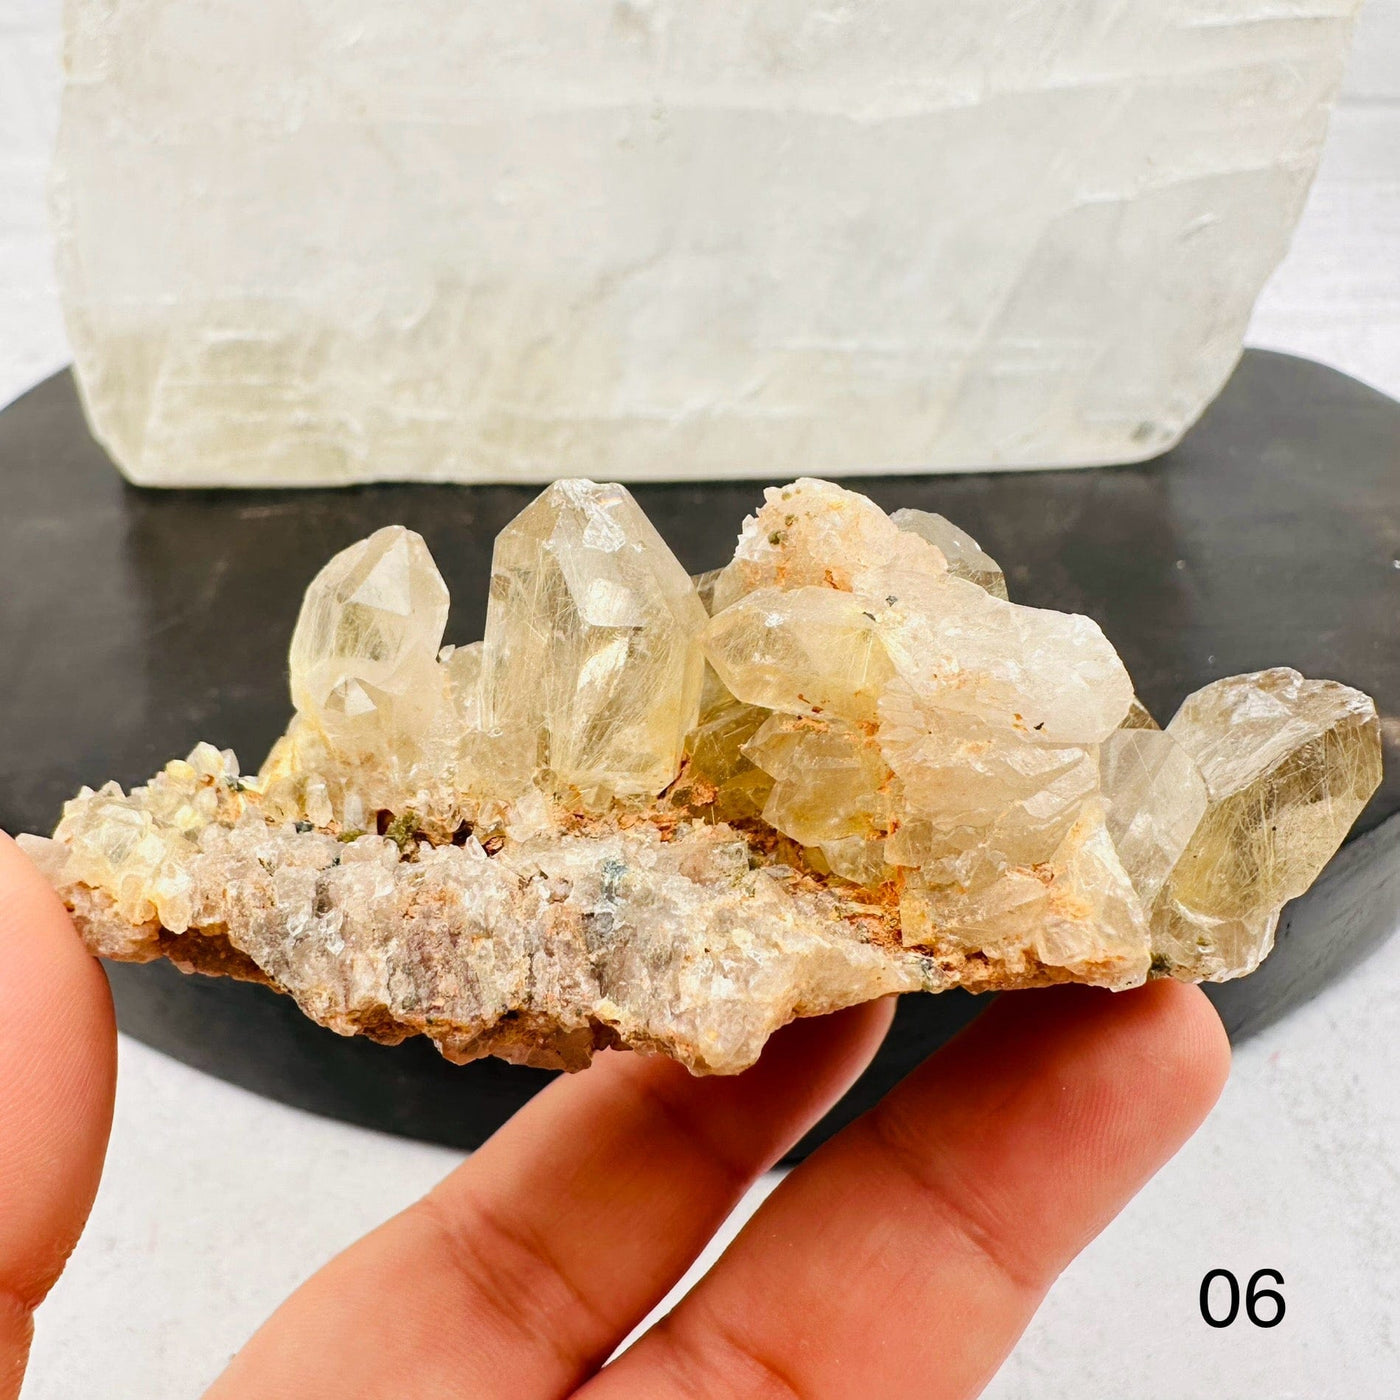 Natural Smoky Quartz Cluster with Rutilated inclusions. Option 06 in hand for size reference